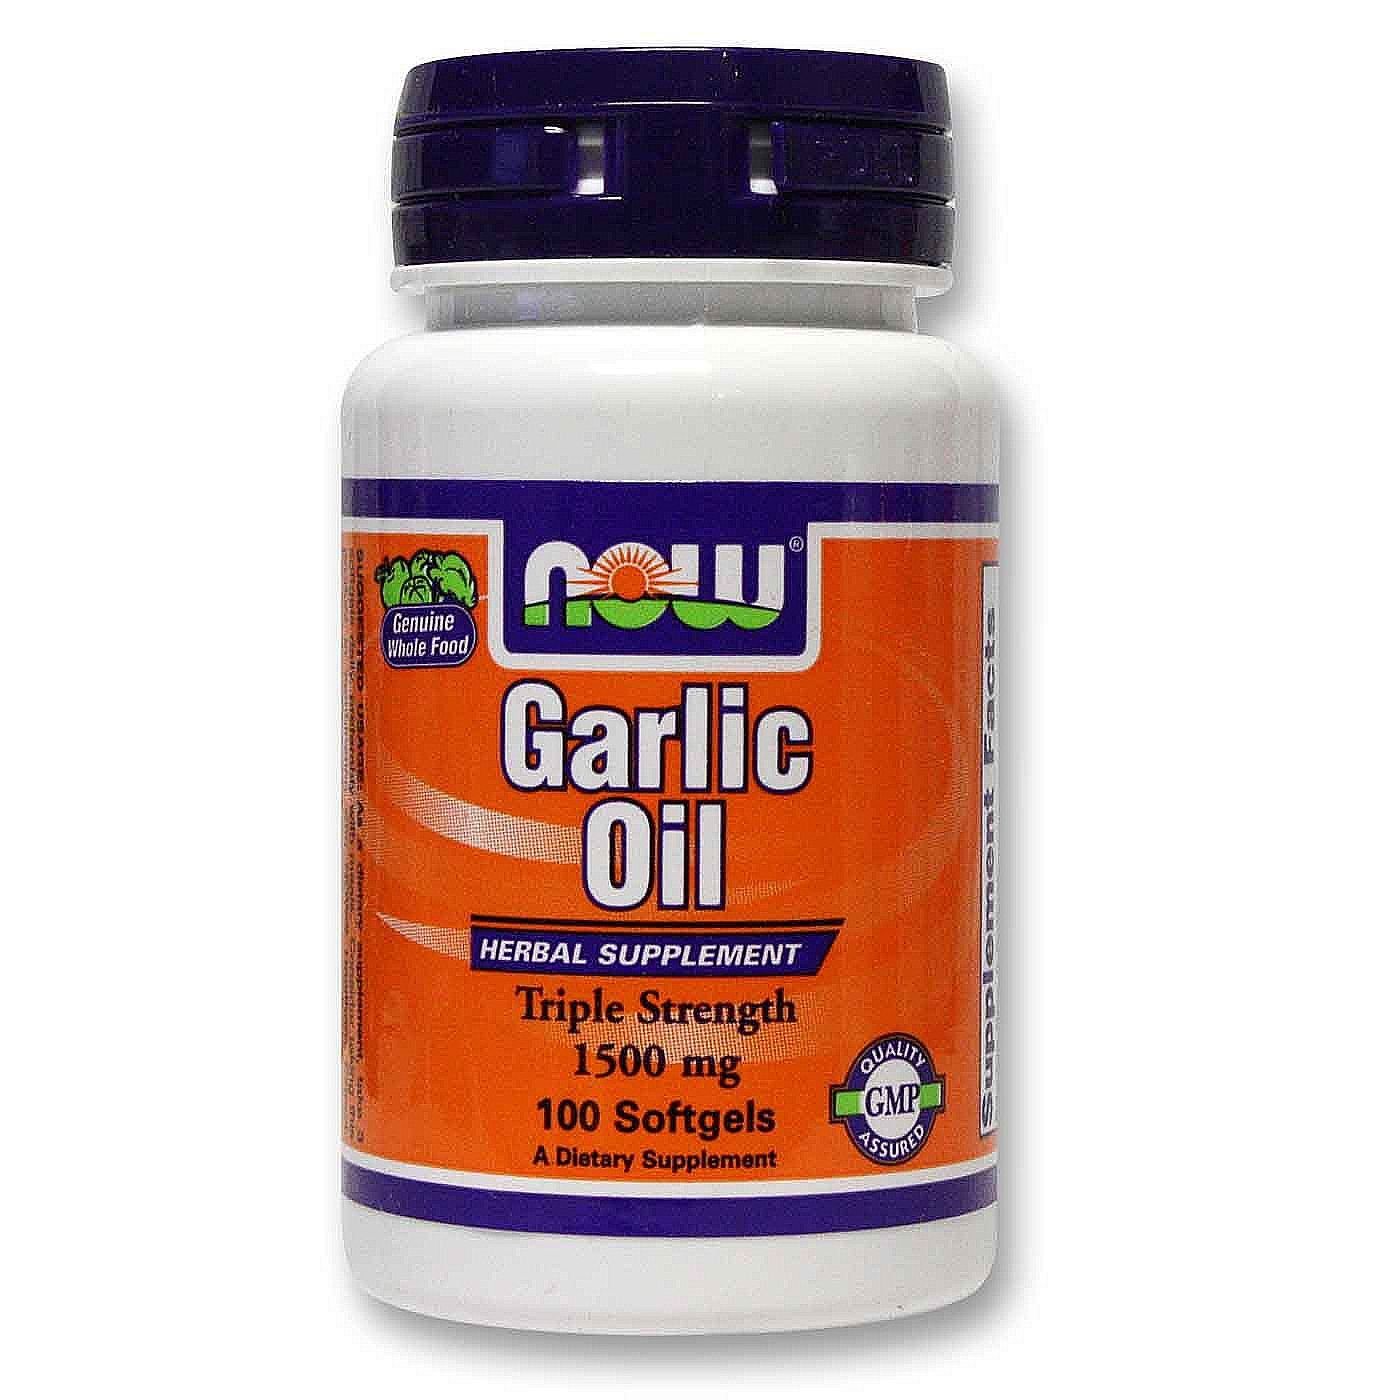 Garlic Oil, 100 pcs, Now. Special supplements. 